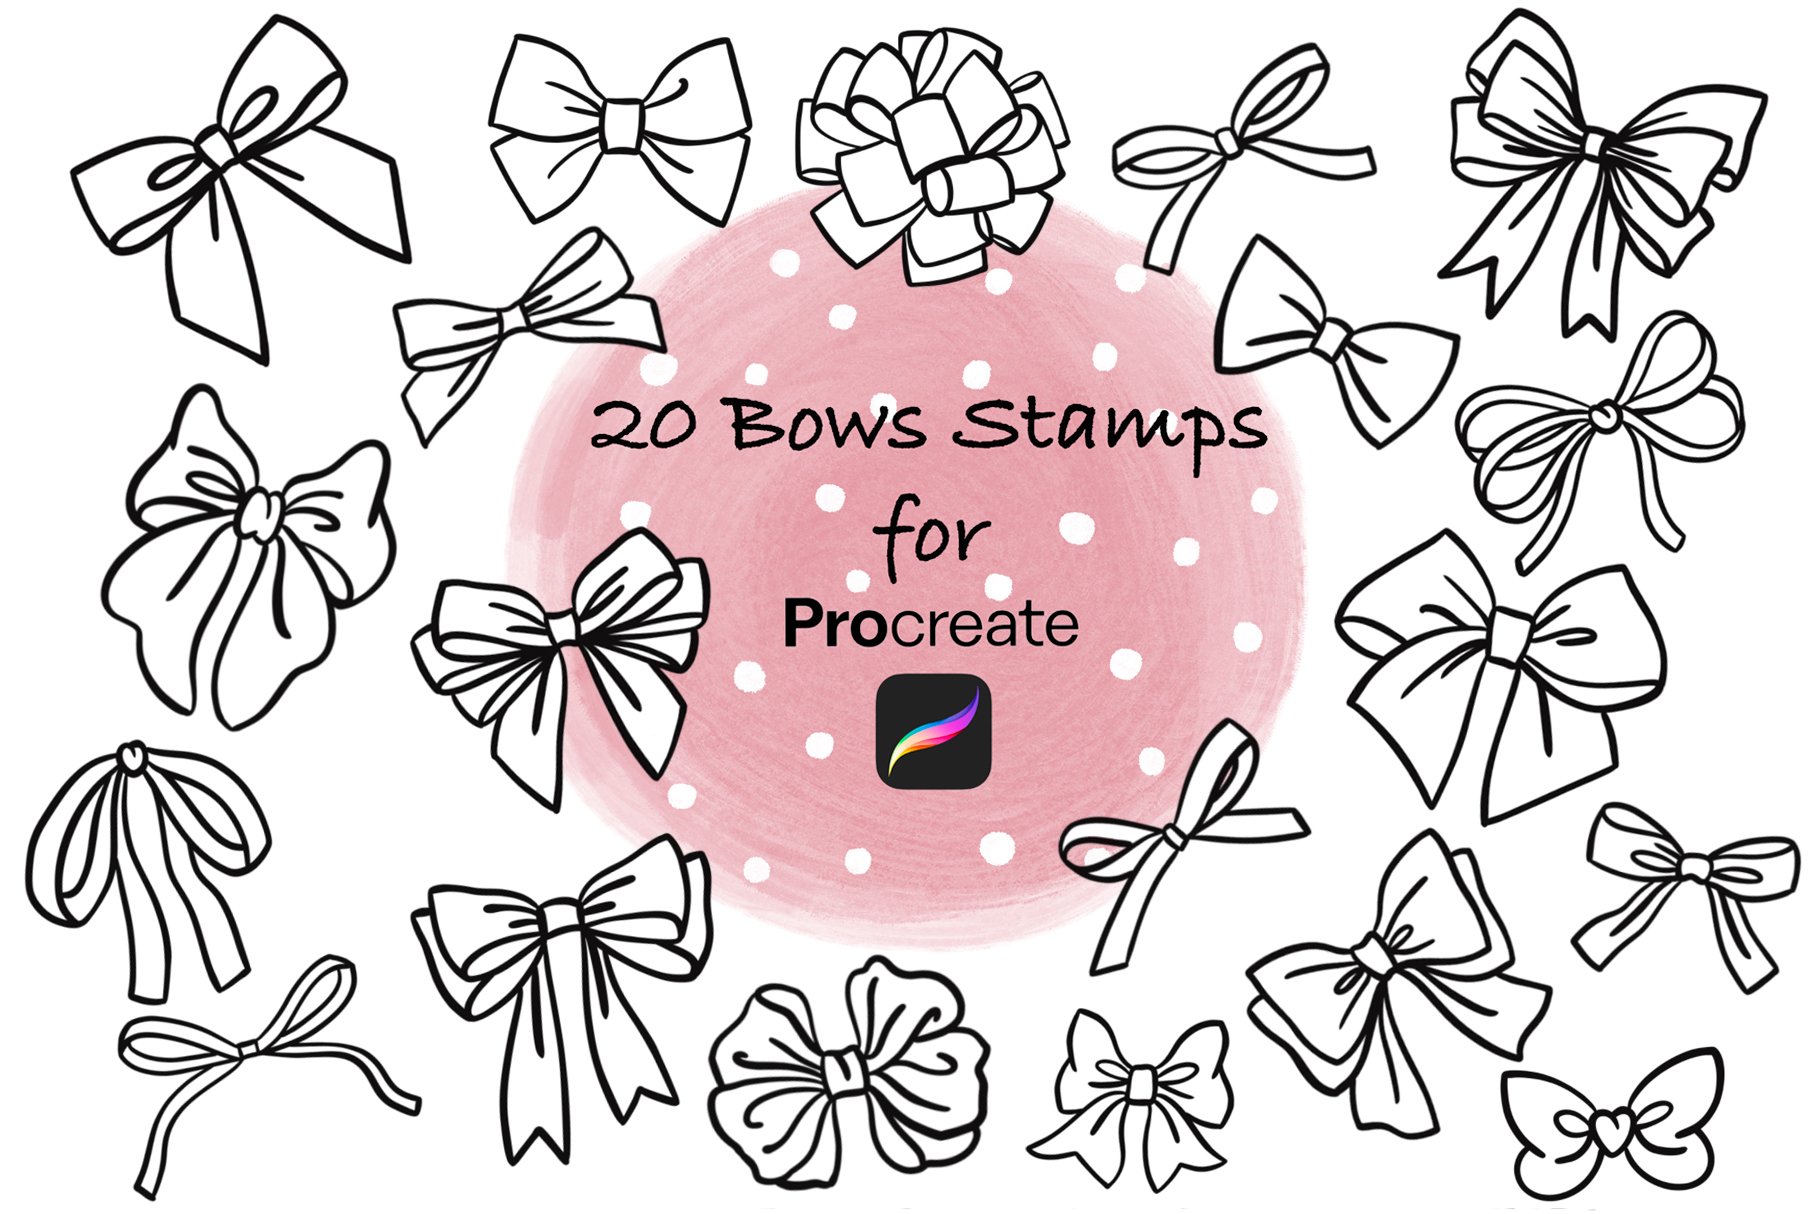 20 Bows Procreate Brushes Stampscover image.